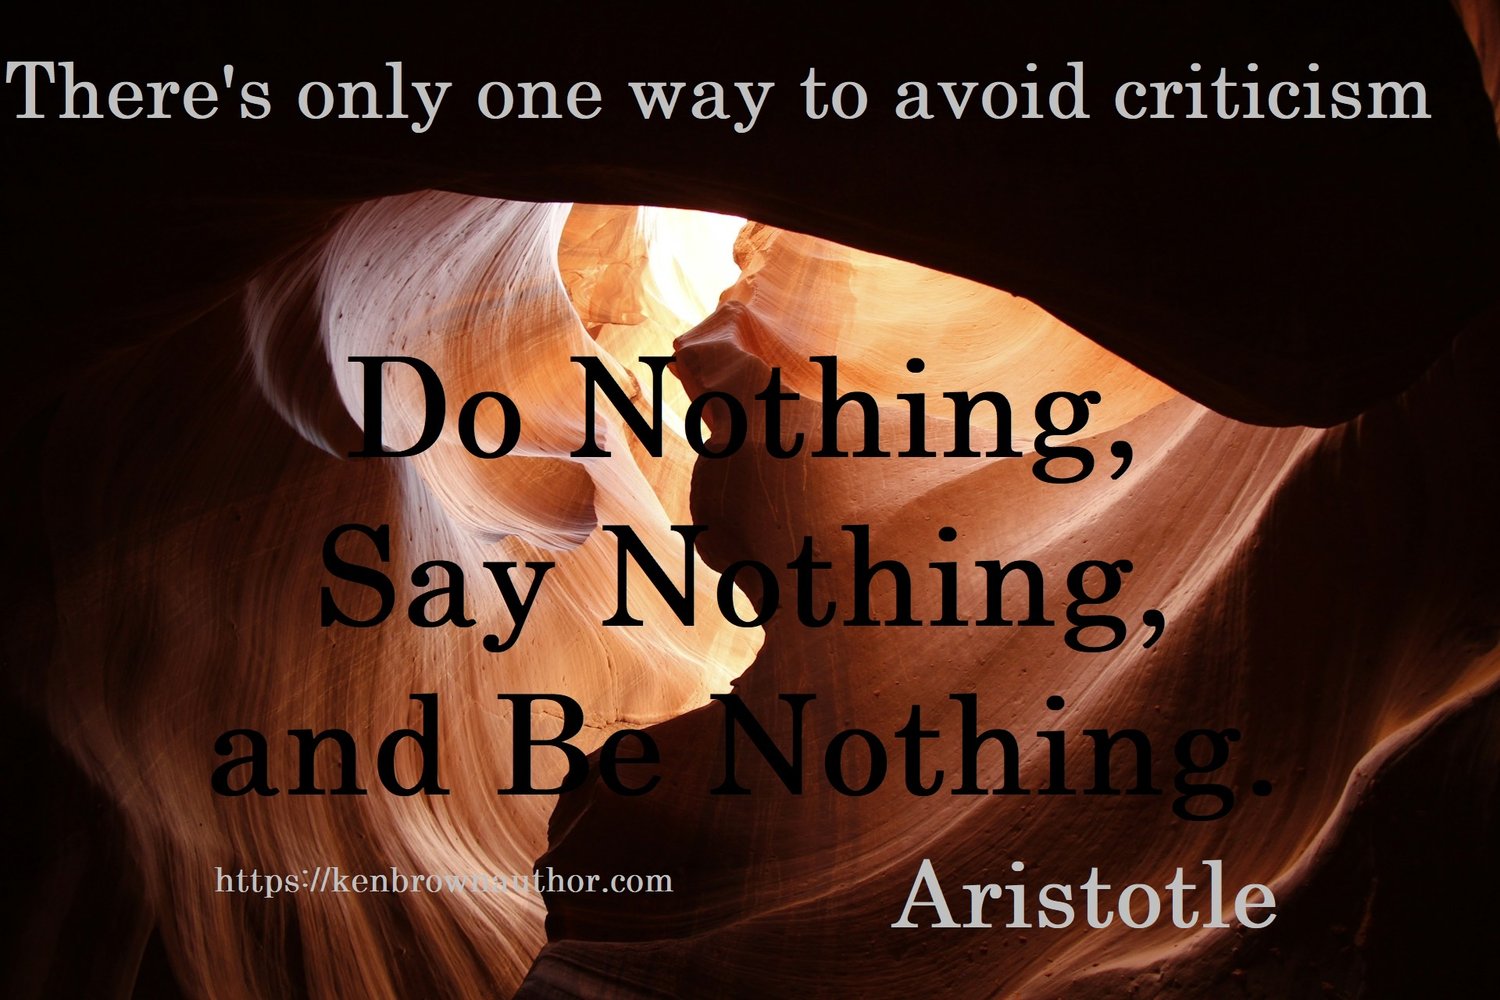 To avoid criticism, do nothing, say nothing, and be nothing. Or Take action and be something, say something, and be someone.